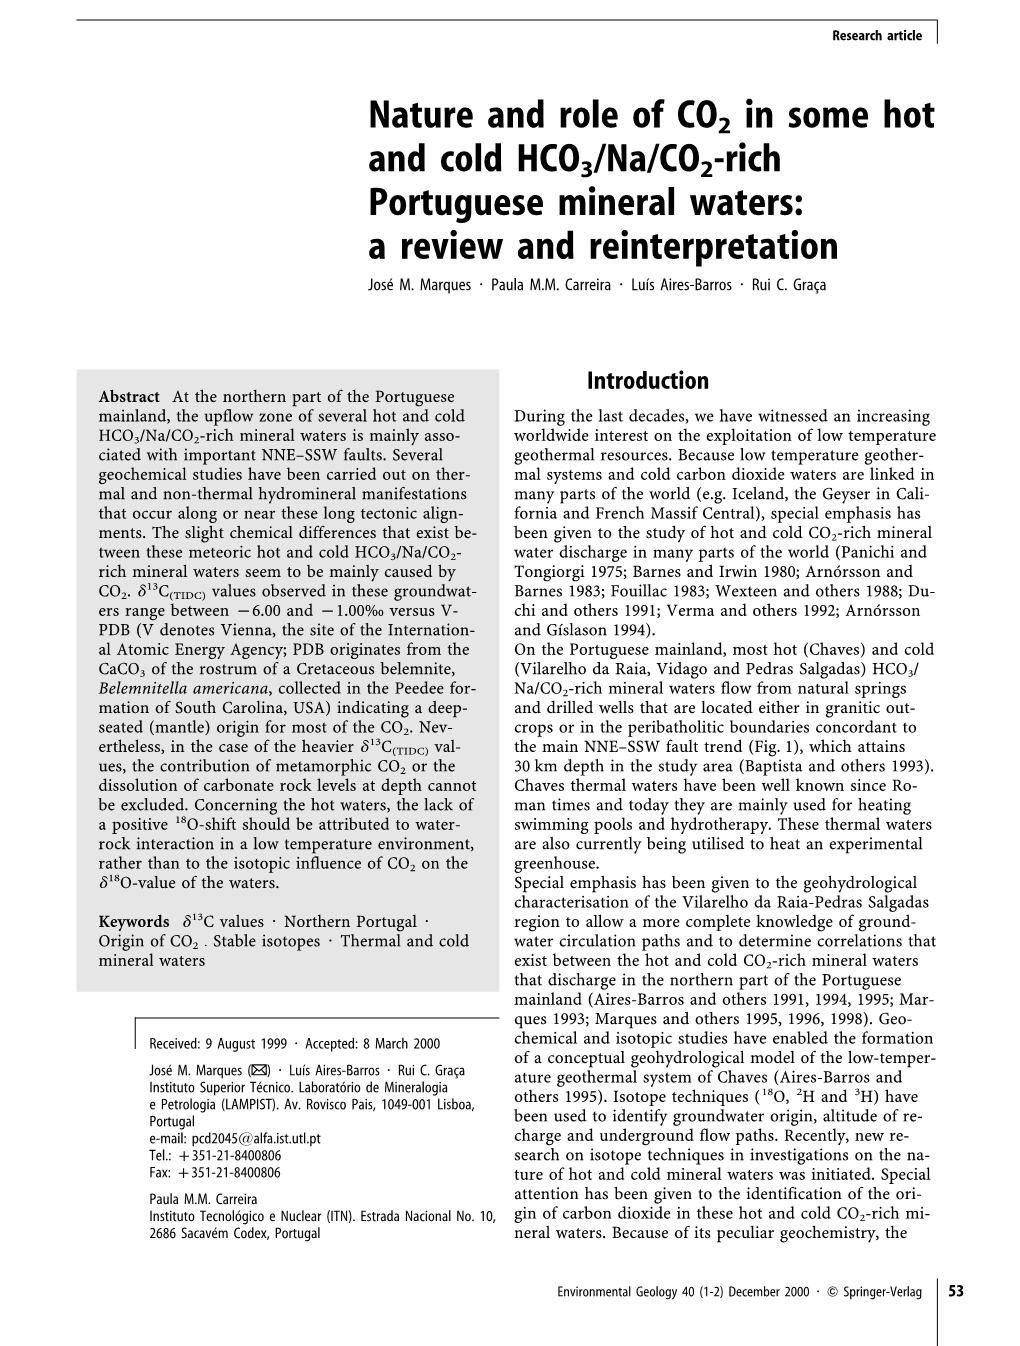 Nature and Role of CO2 in Some Hot and Cold HCO3/Na/CO2-Rich Portuguese Mineral Waters: a Review and Reinterpretation José M